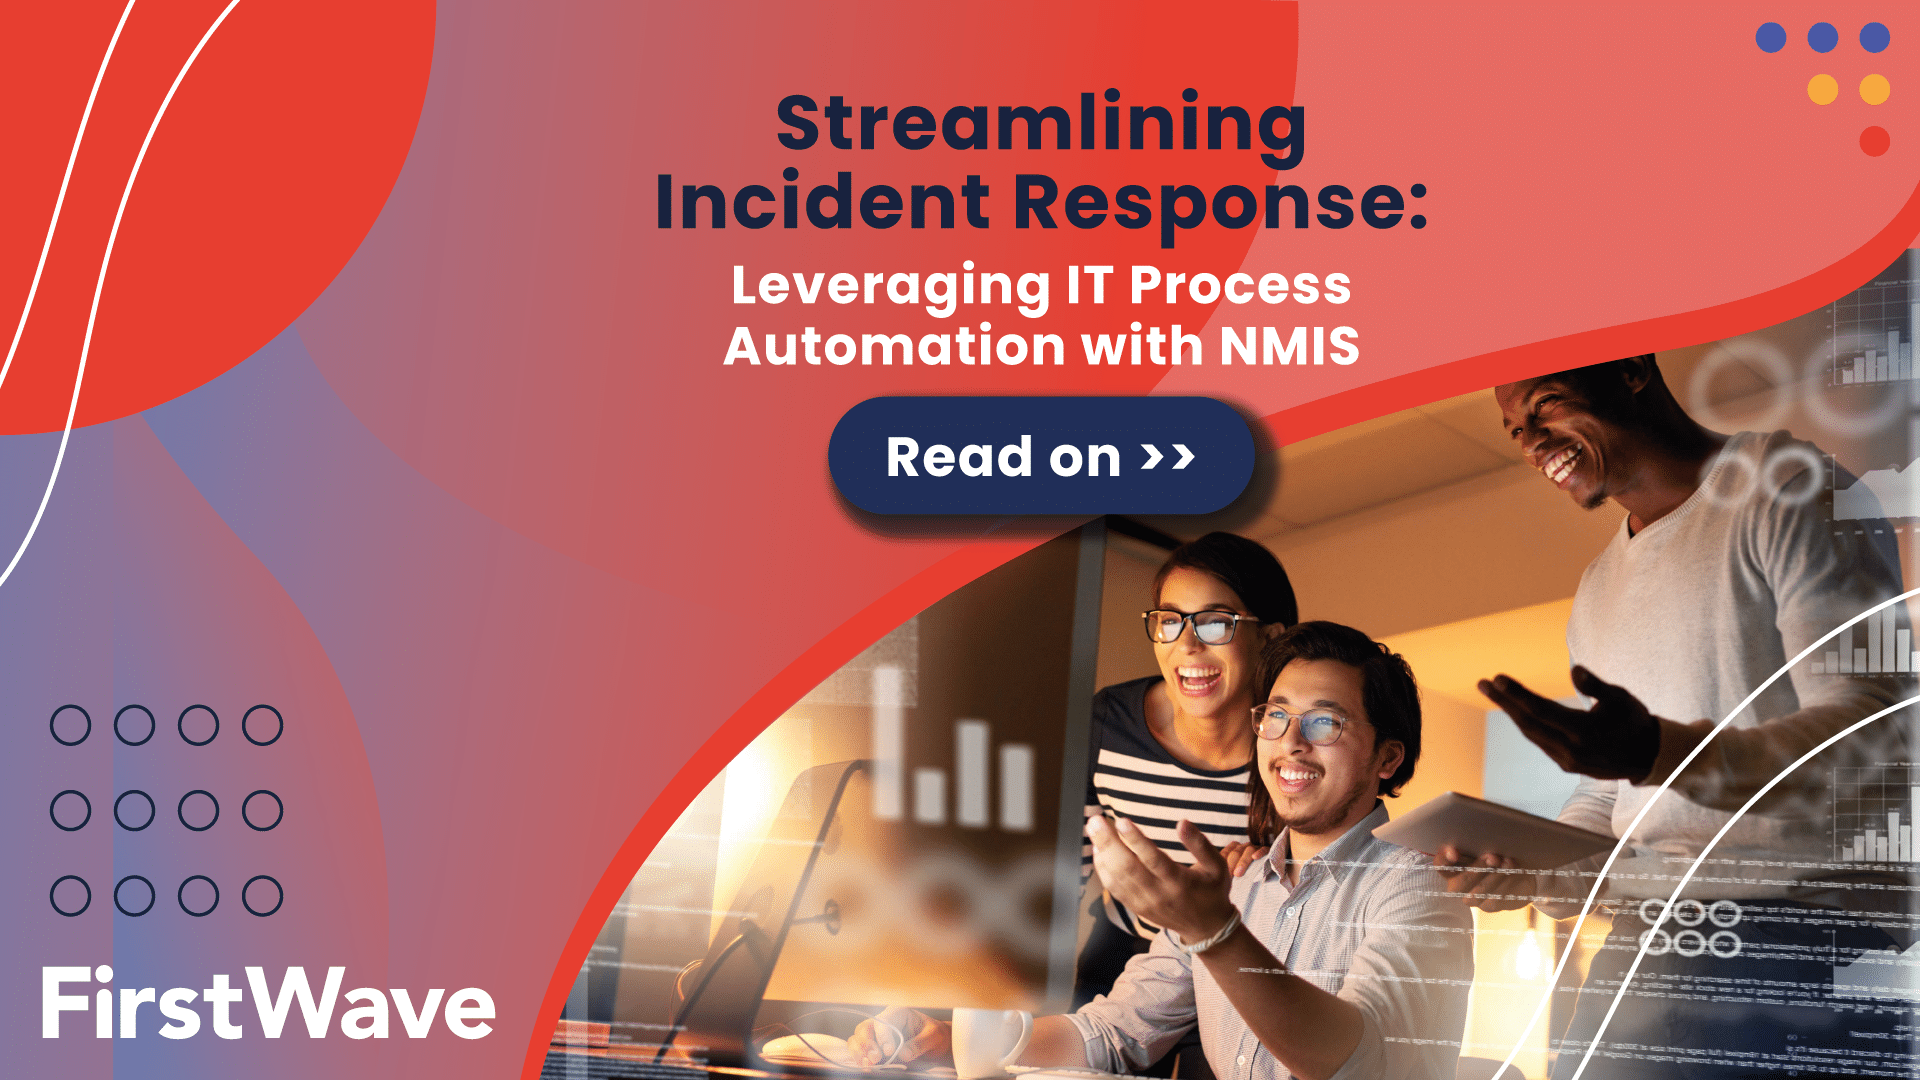 Streamlining Incident Response: Leveraging IT Process Automation with NMIS